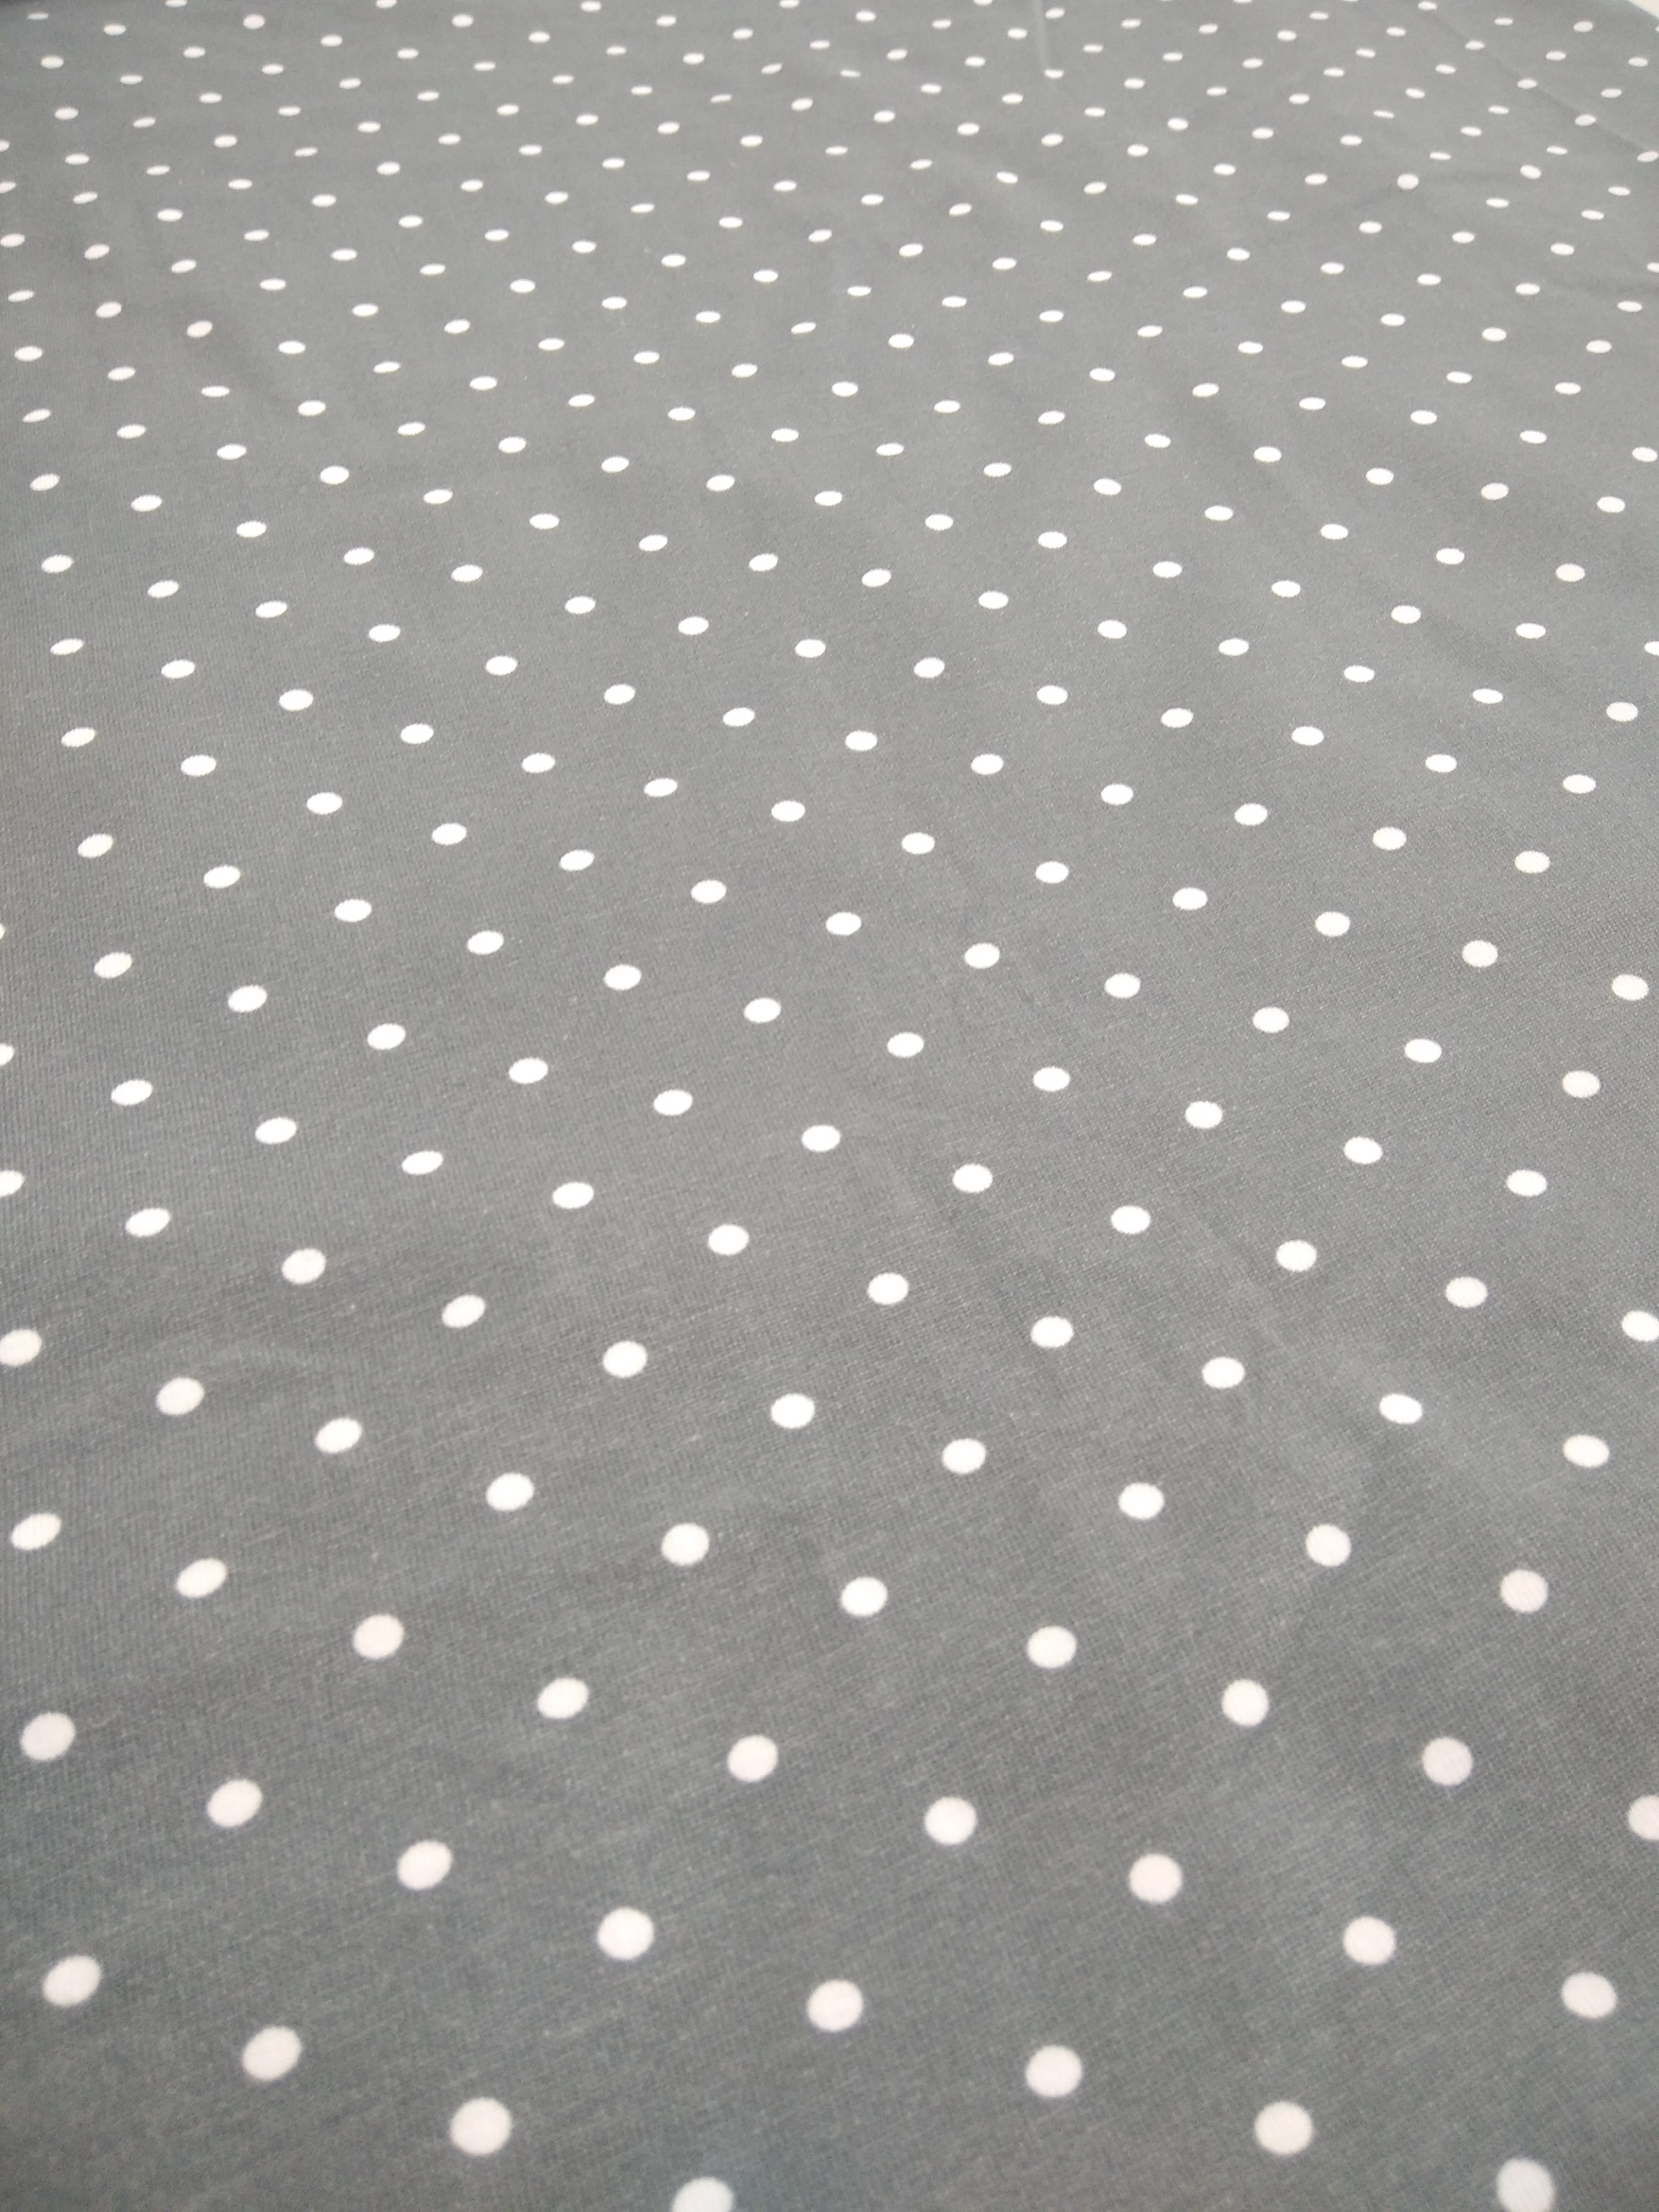 Cotton single jersey with elastane, 1 meter, 185gr/m2, grey with white dot